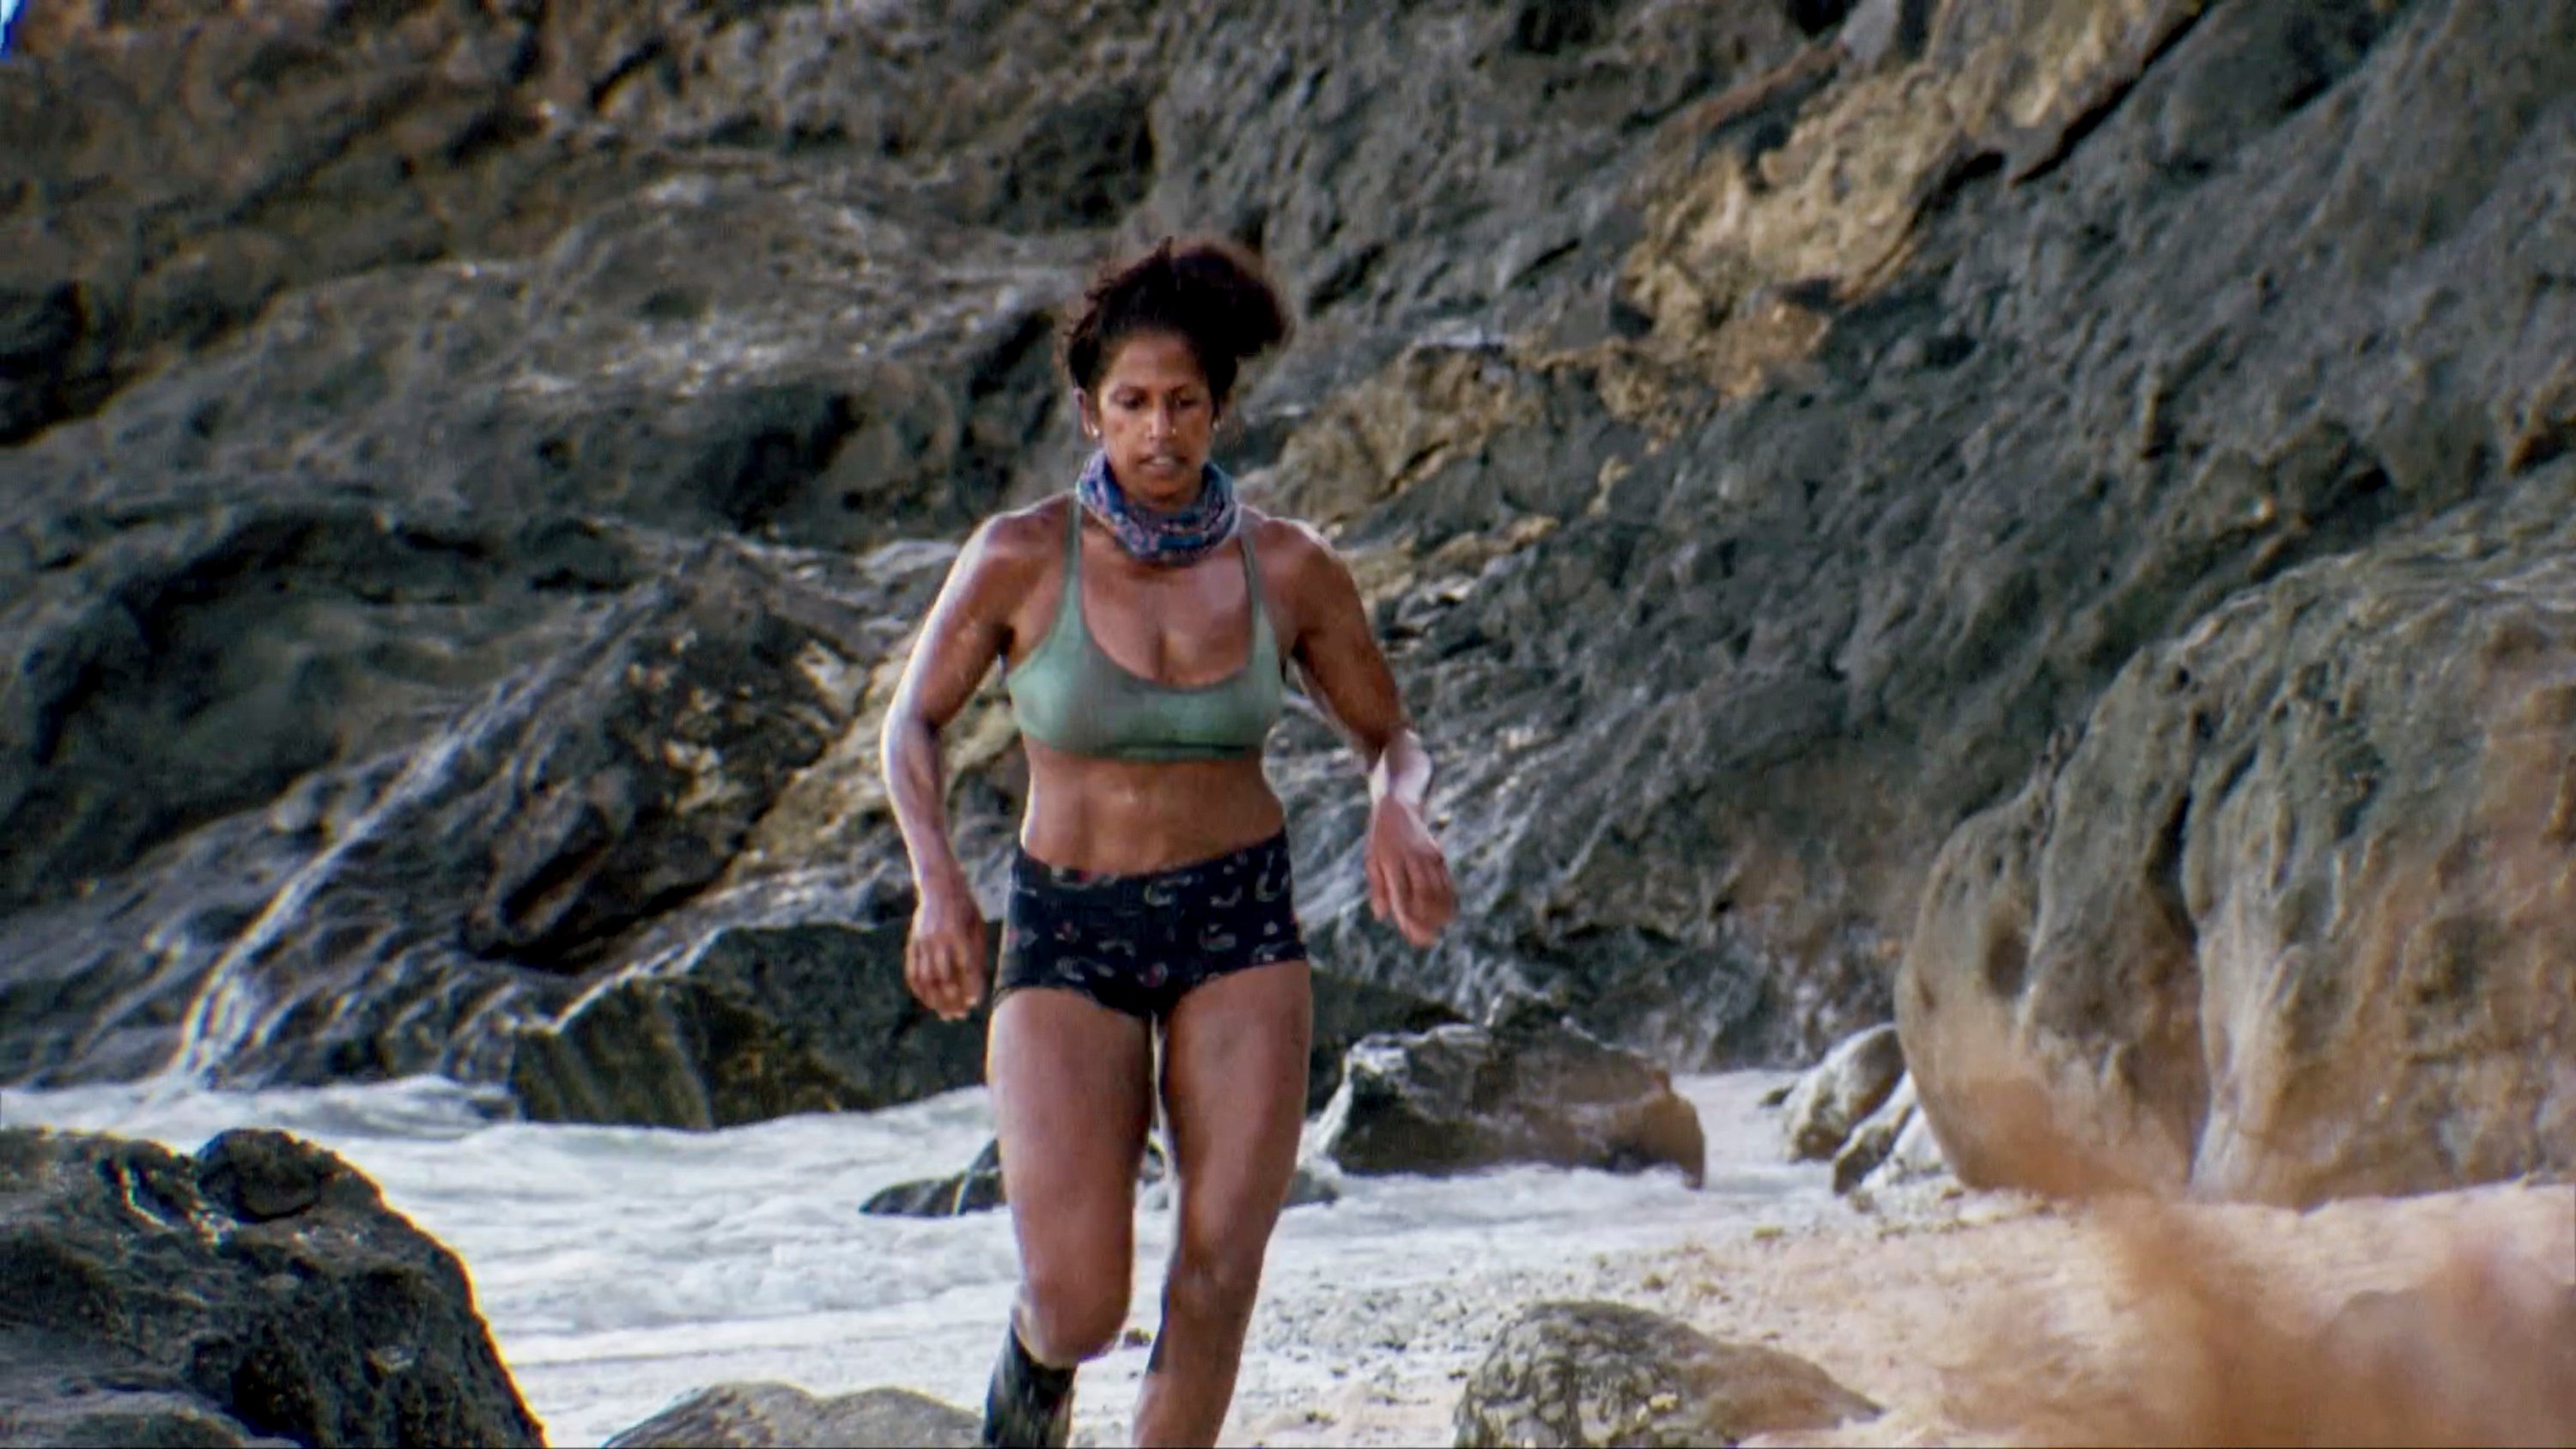 Natalie Anderson on the two-hour Thirteenth episode of 'Survivor: Winners at War'